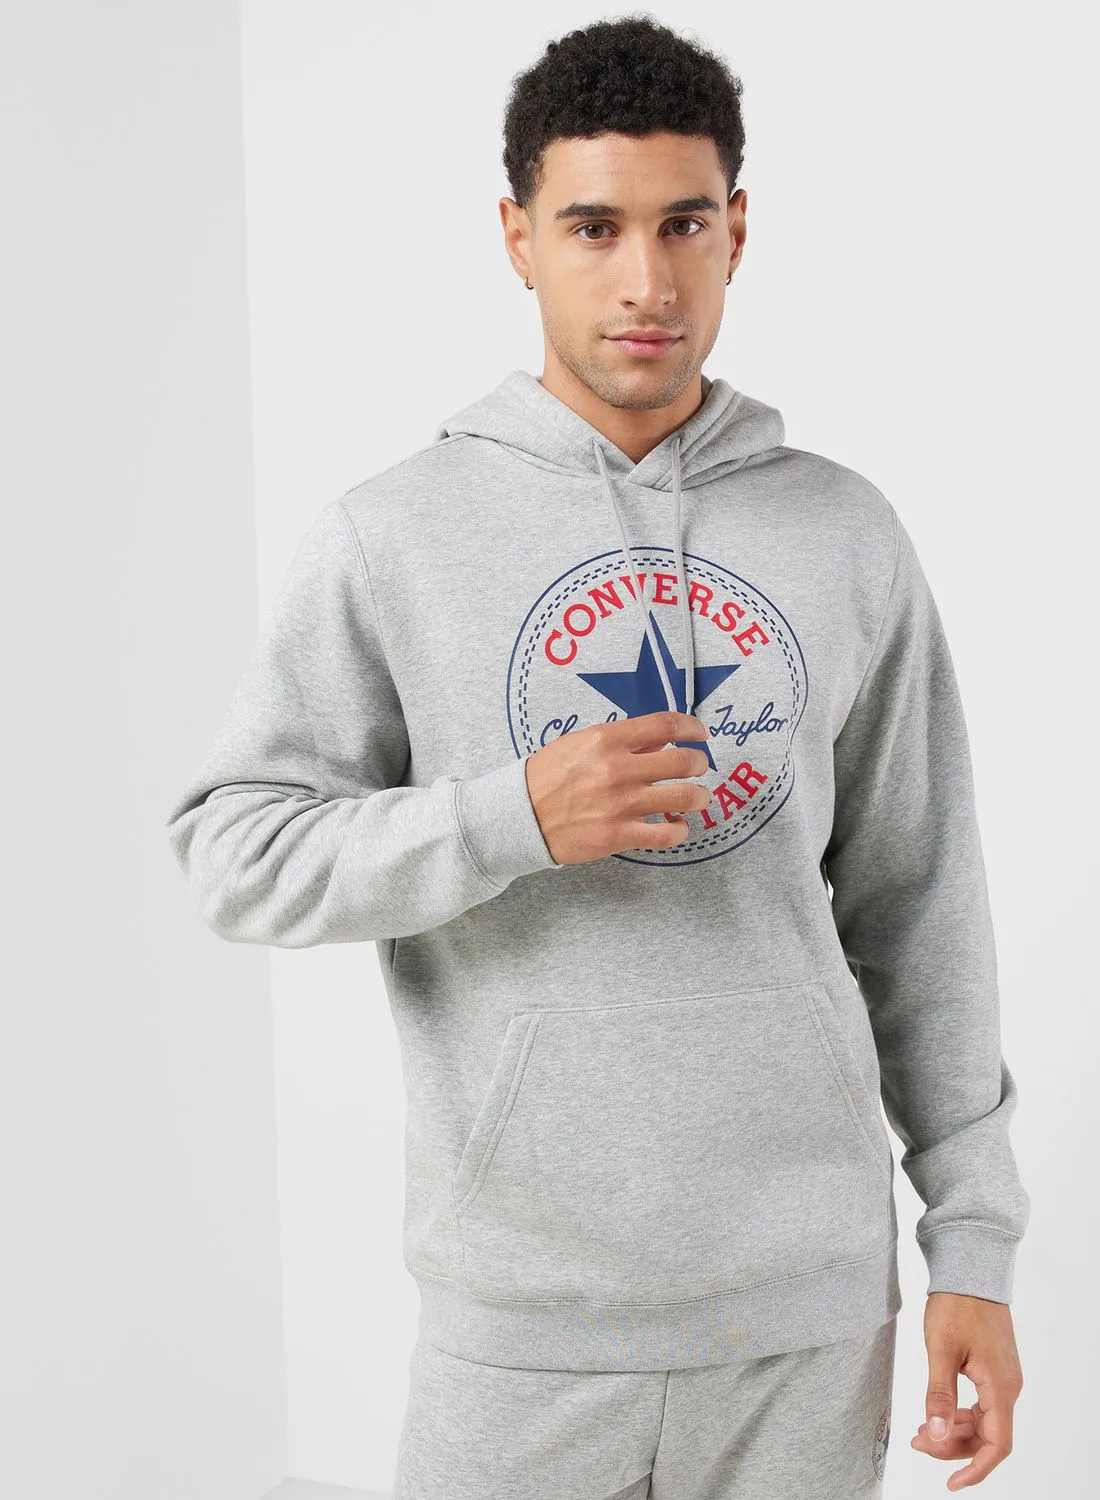 CONVERSE All Star Patch Hoodie